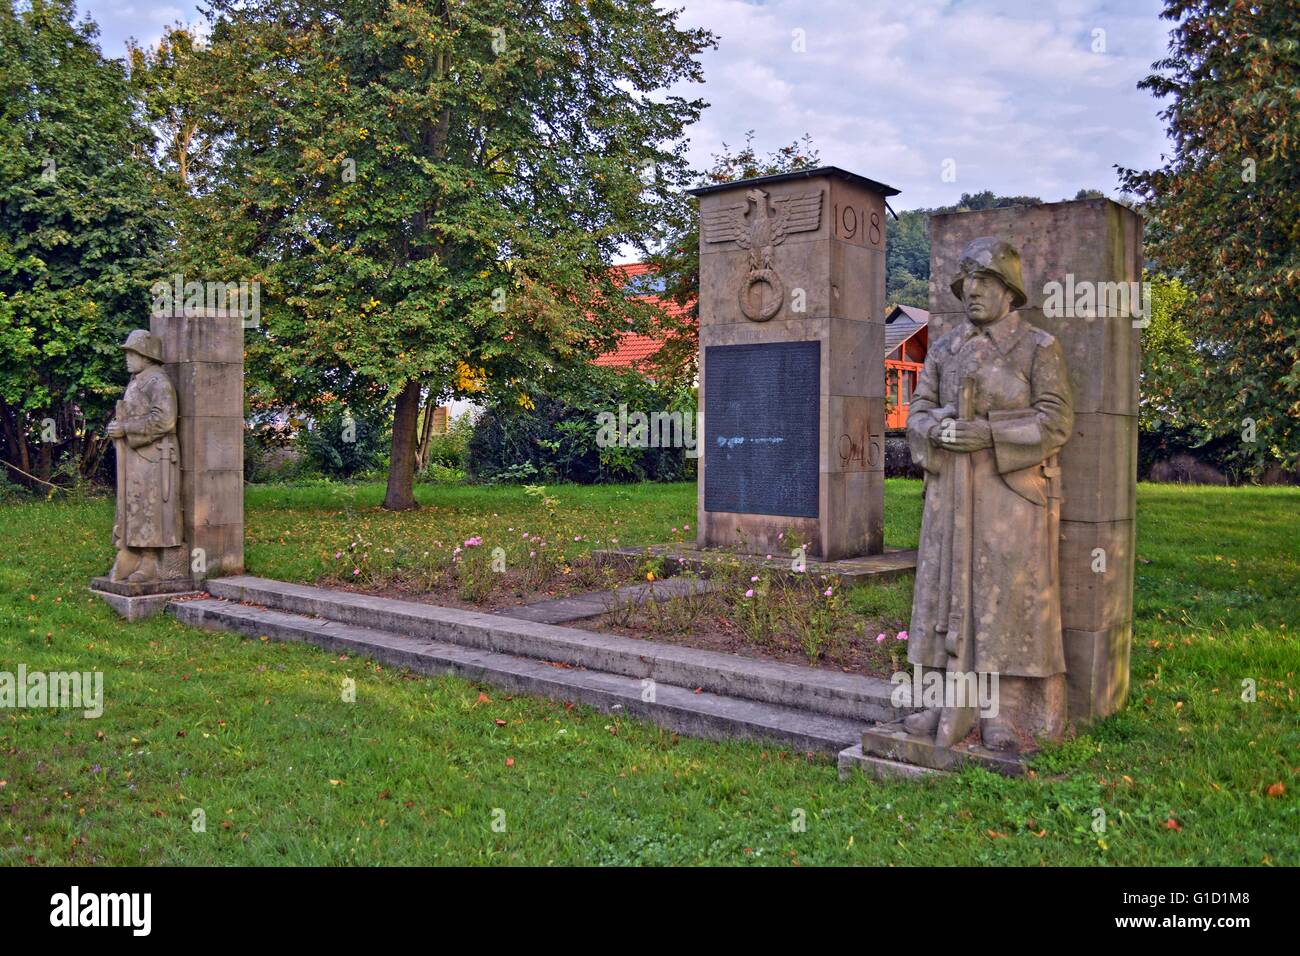 German World War memorial, erected 1935, in Saaarland. View from right. Stock Photo